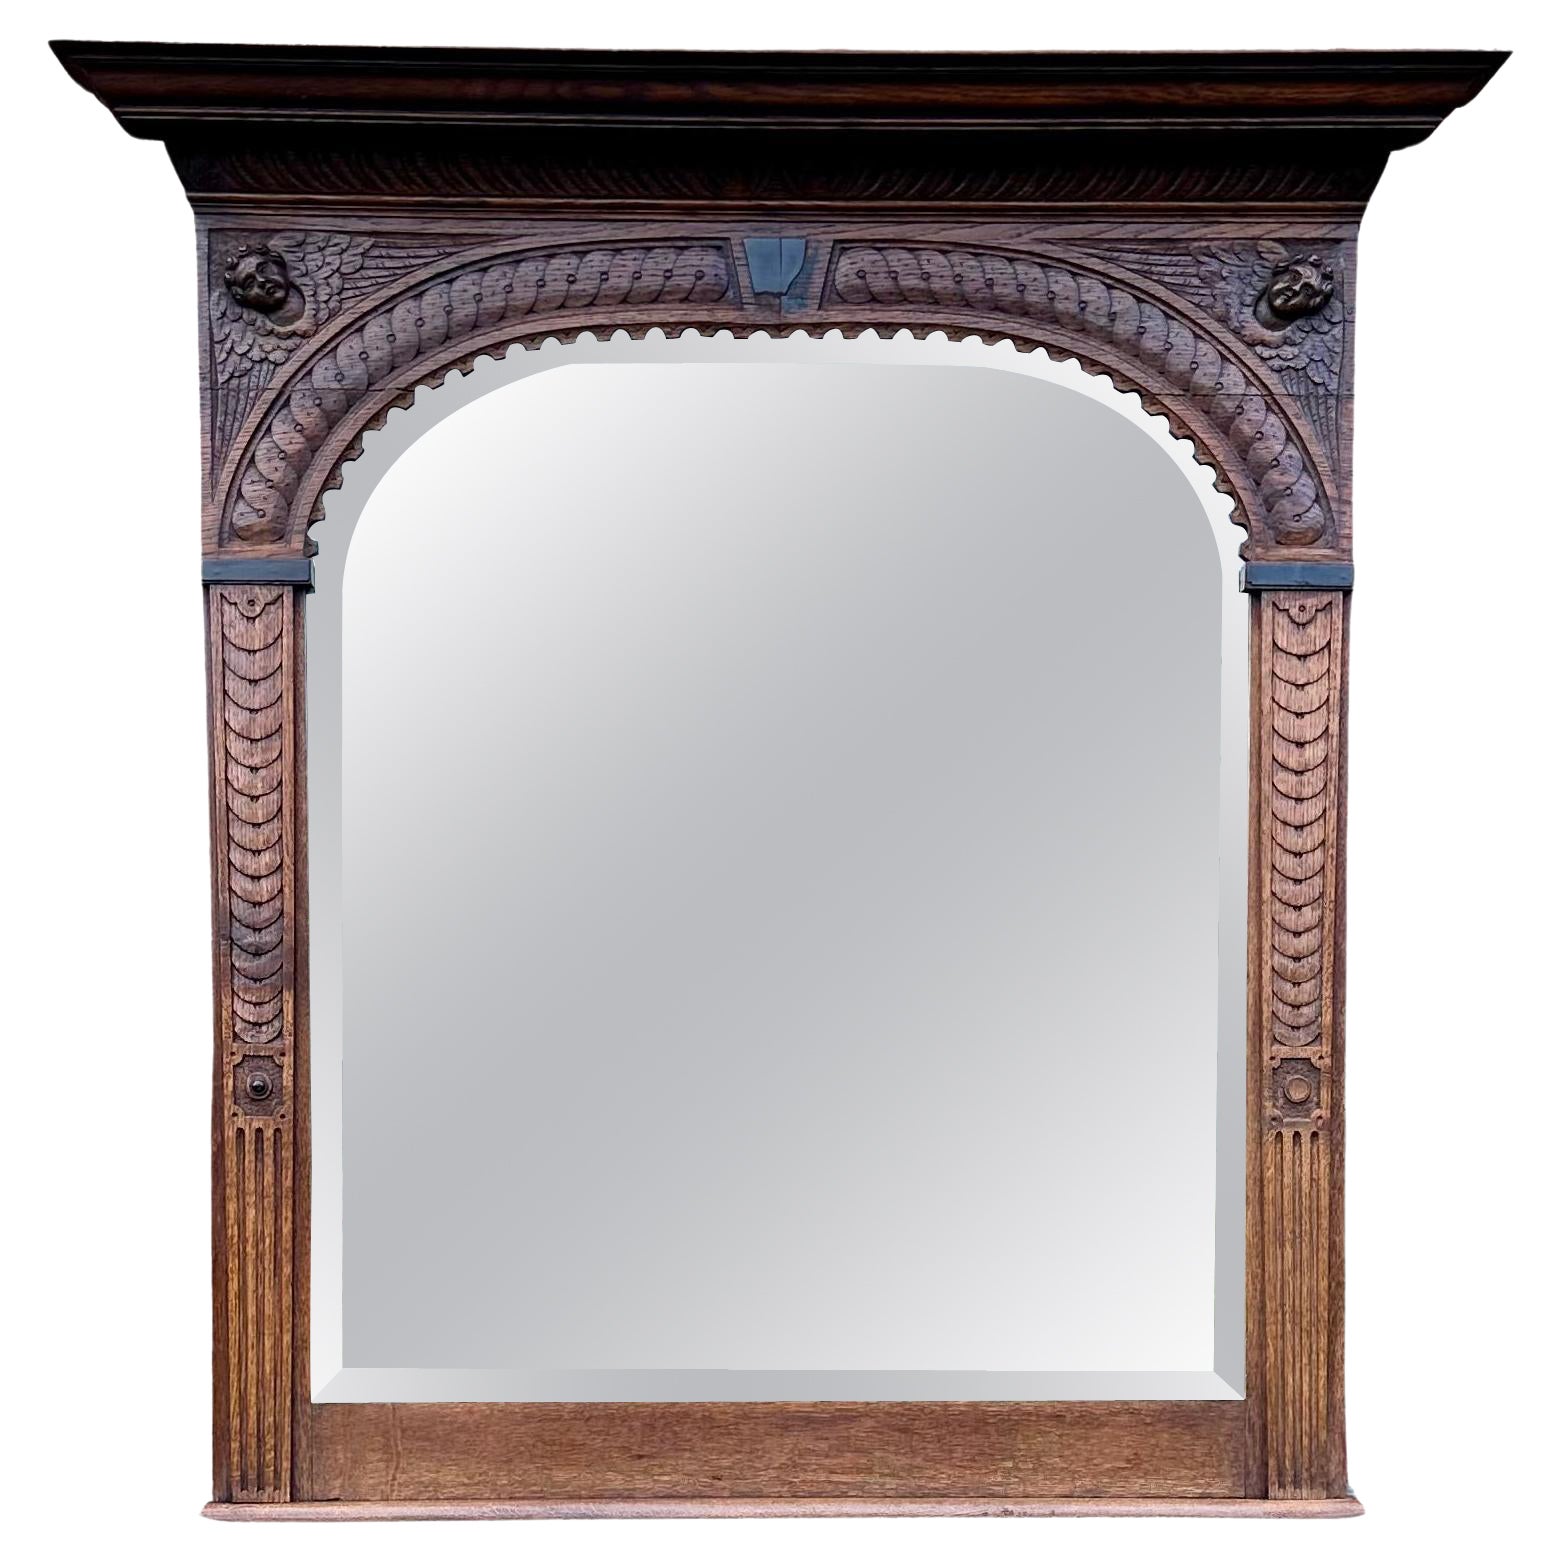 Large Antique Magnificently Carved Renaissance Revival Wall Mirror with Angels For Sale